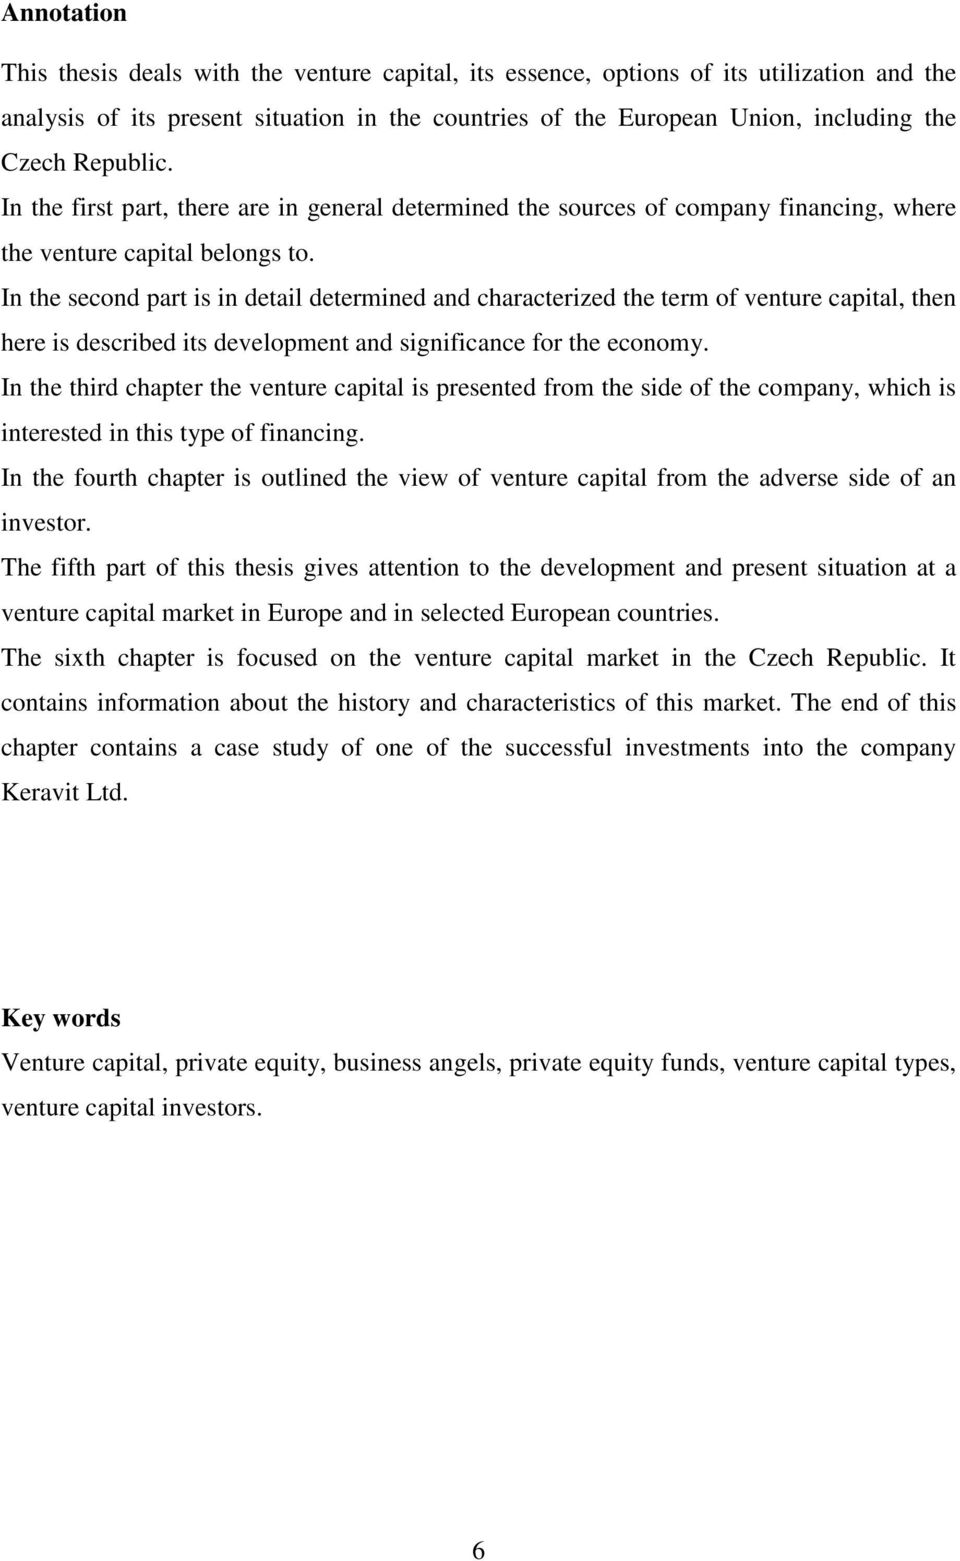 In the second part is in detail determined and characterized the term of venture capital, then here is described its development and significance for the economy.